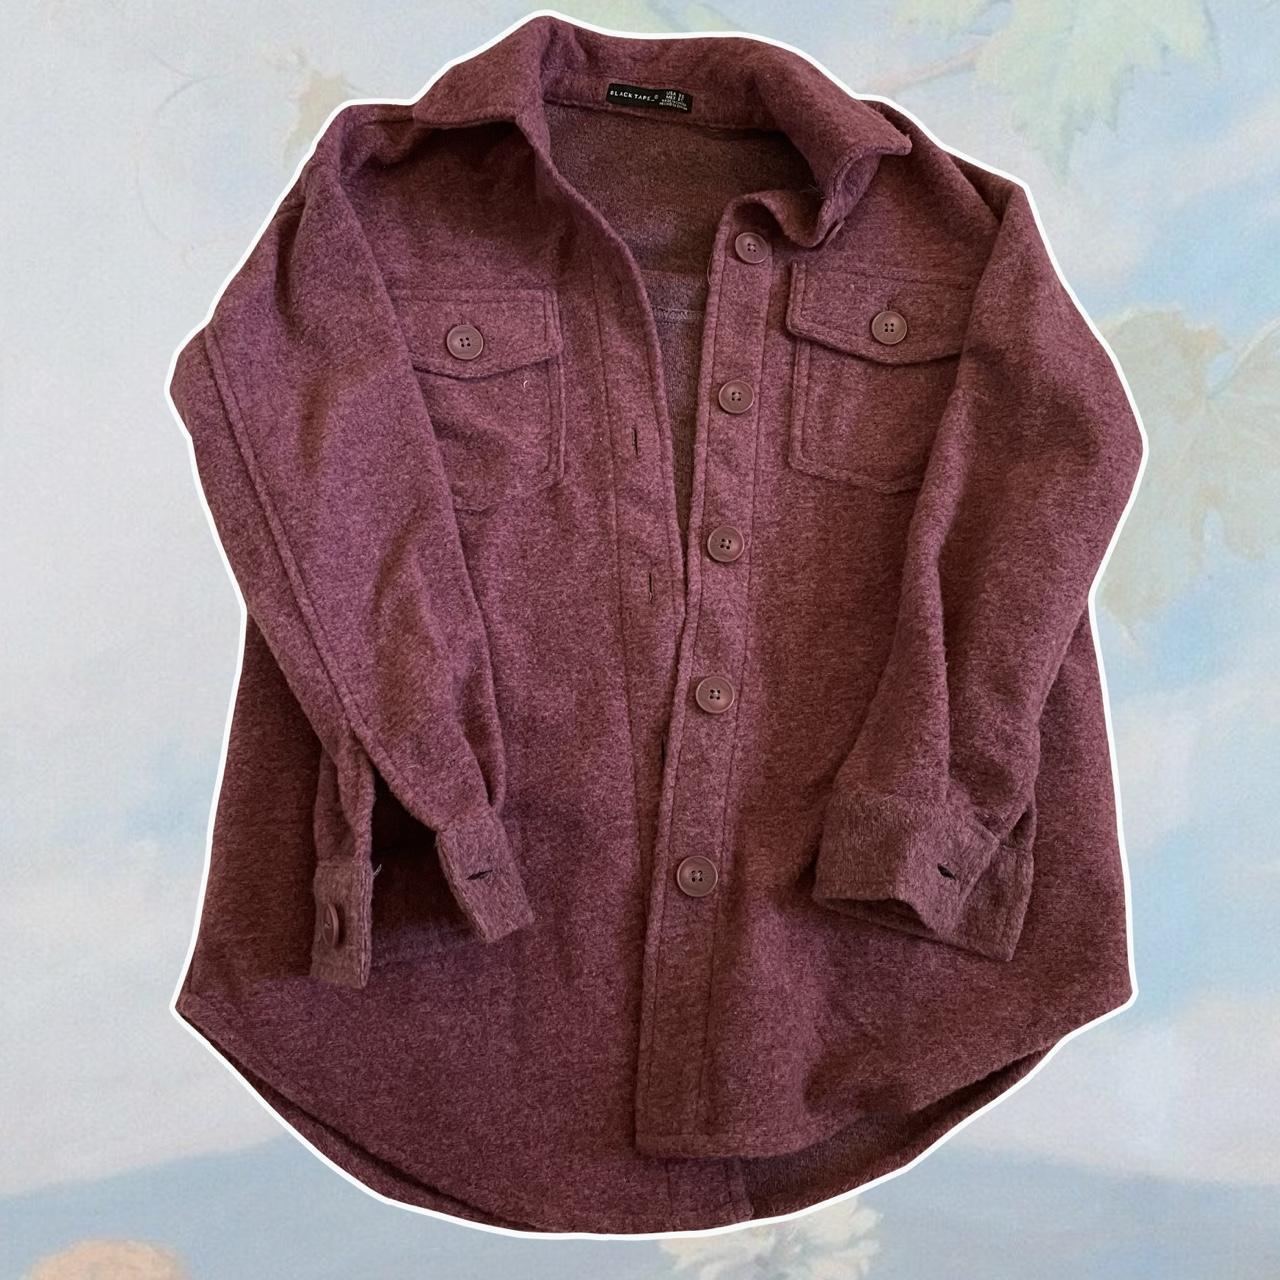 Product Image 1 - Cute burgundy jacket, good for